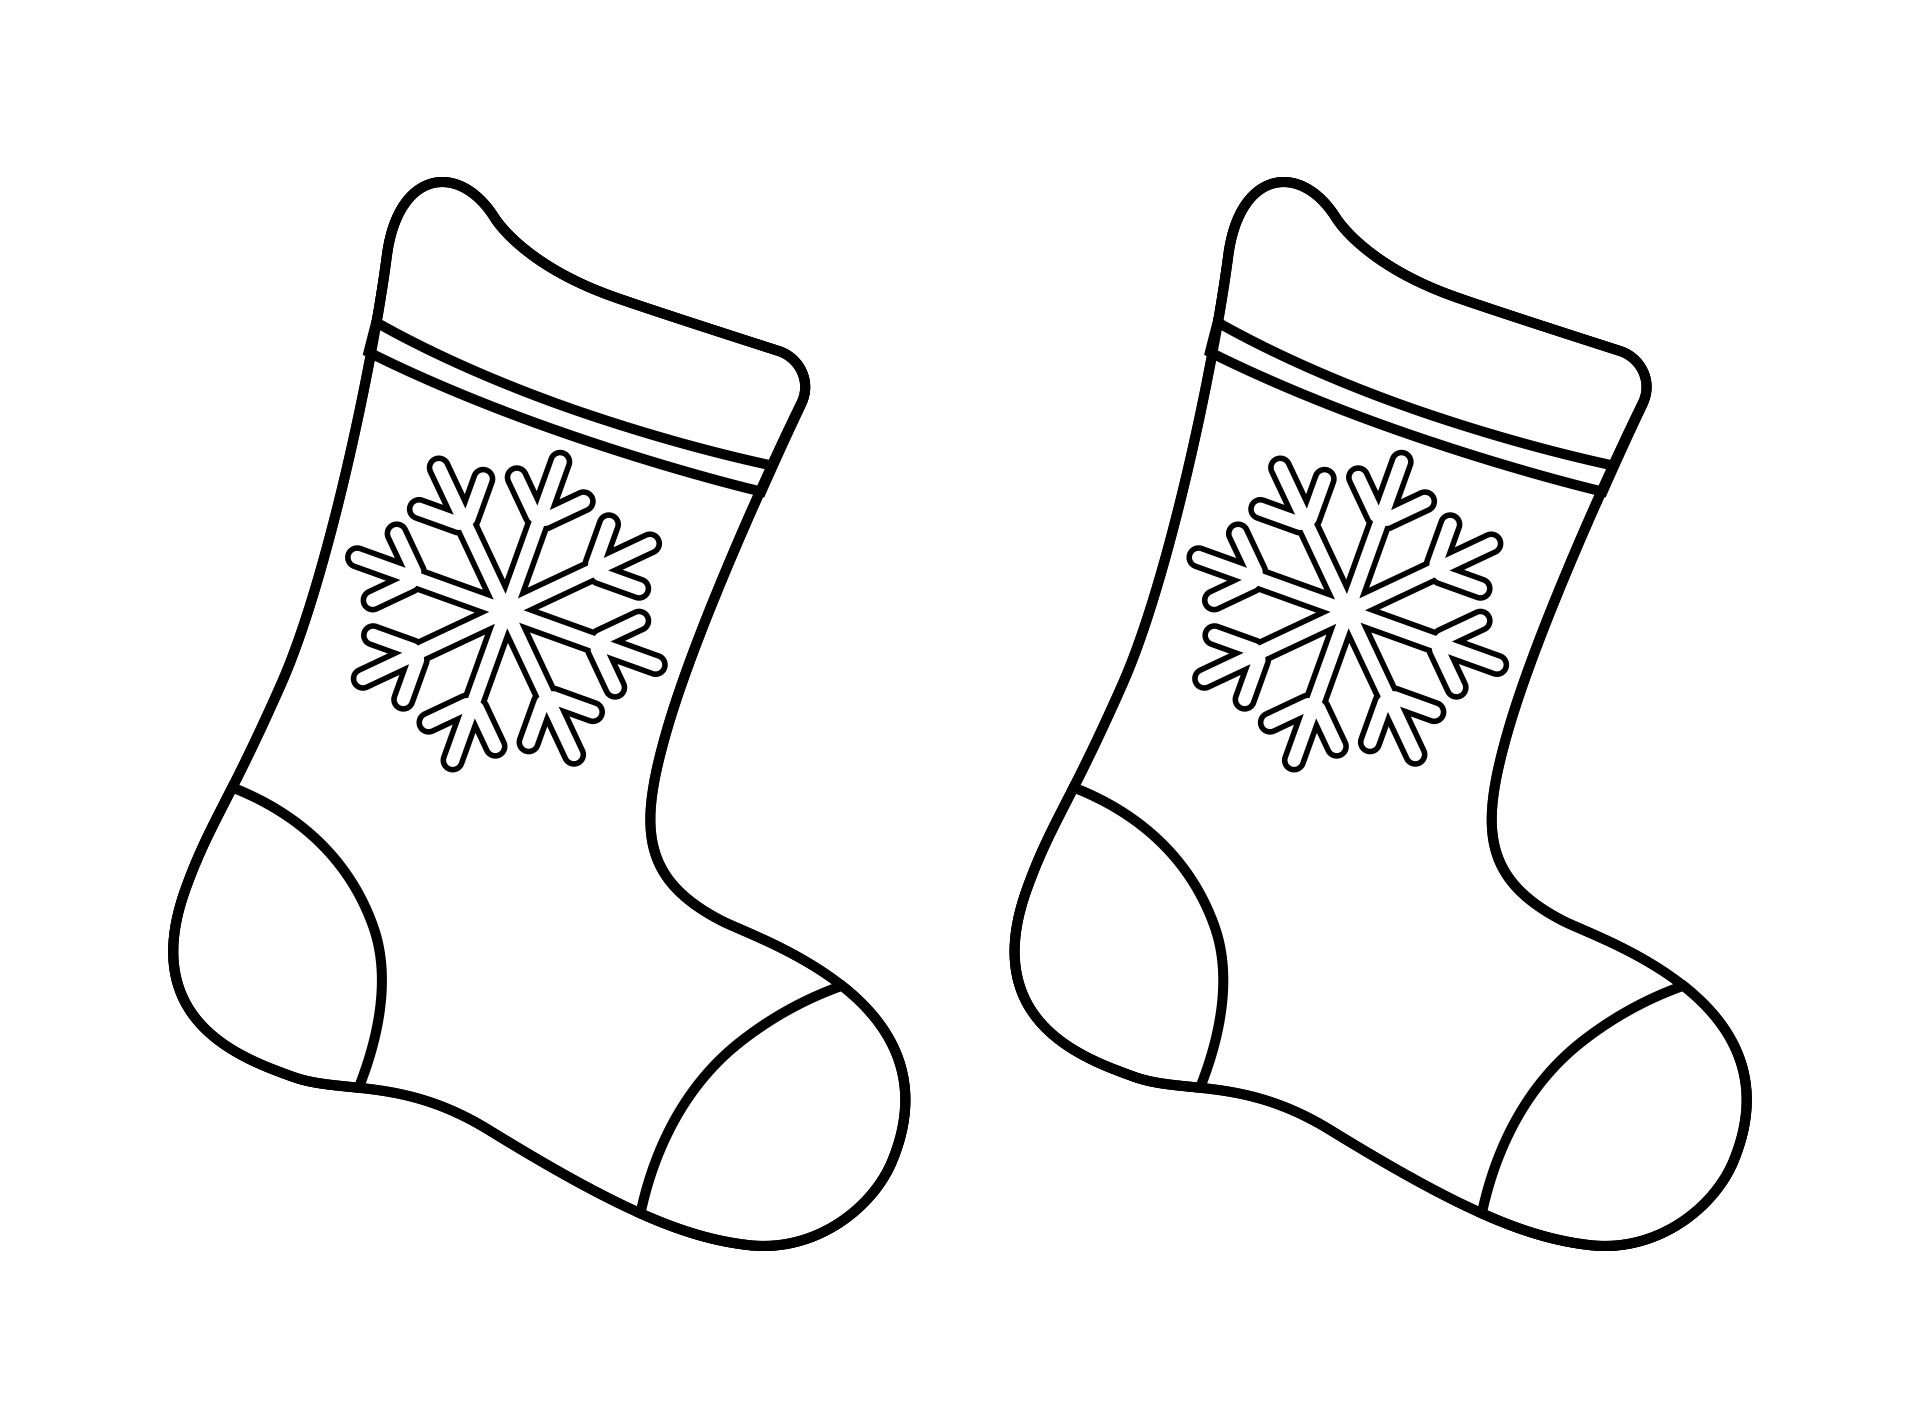 15 Best Free Printable Christmas Stocking Template